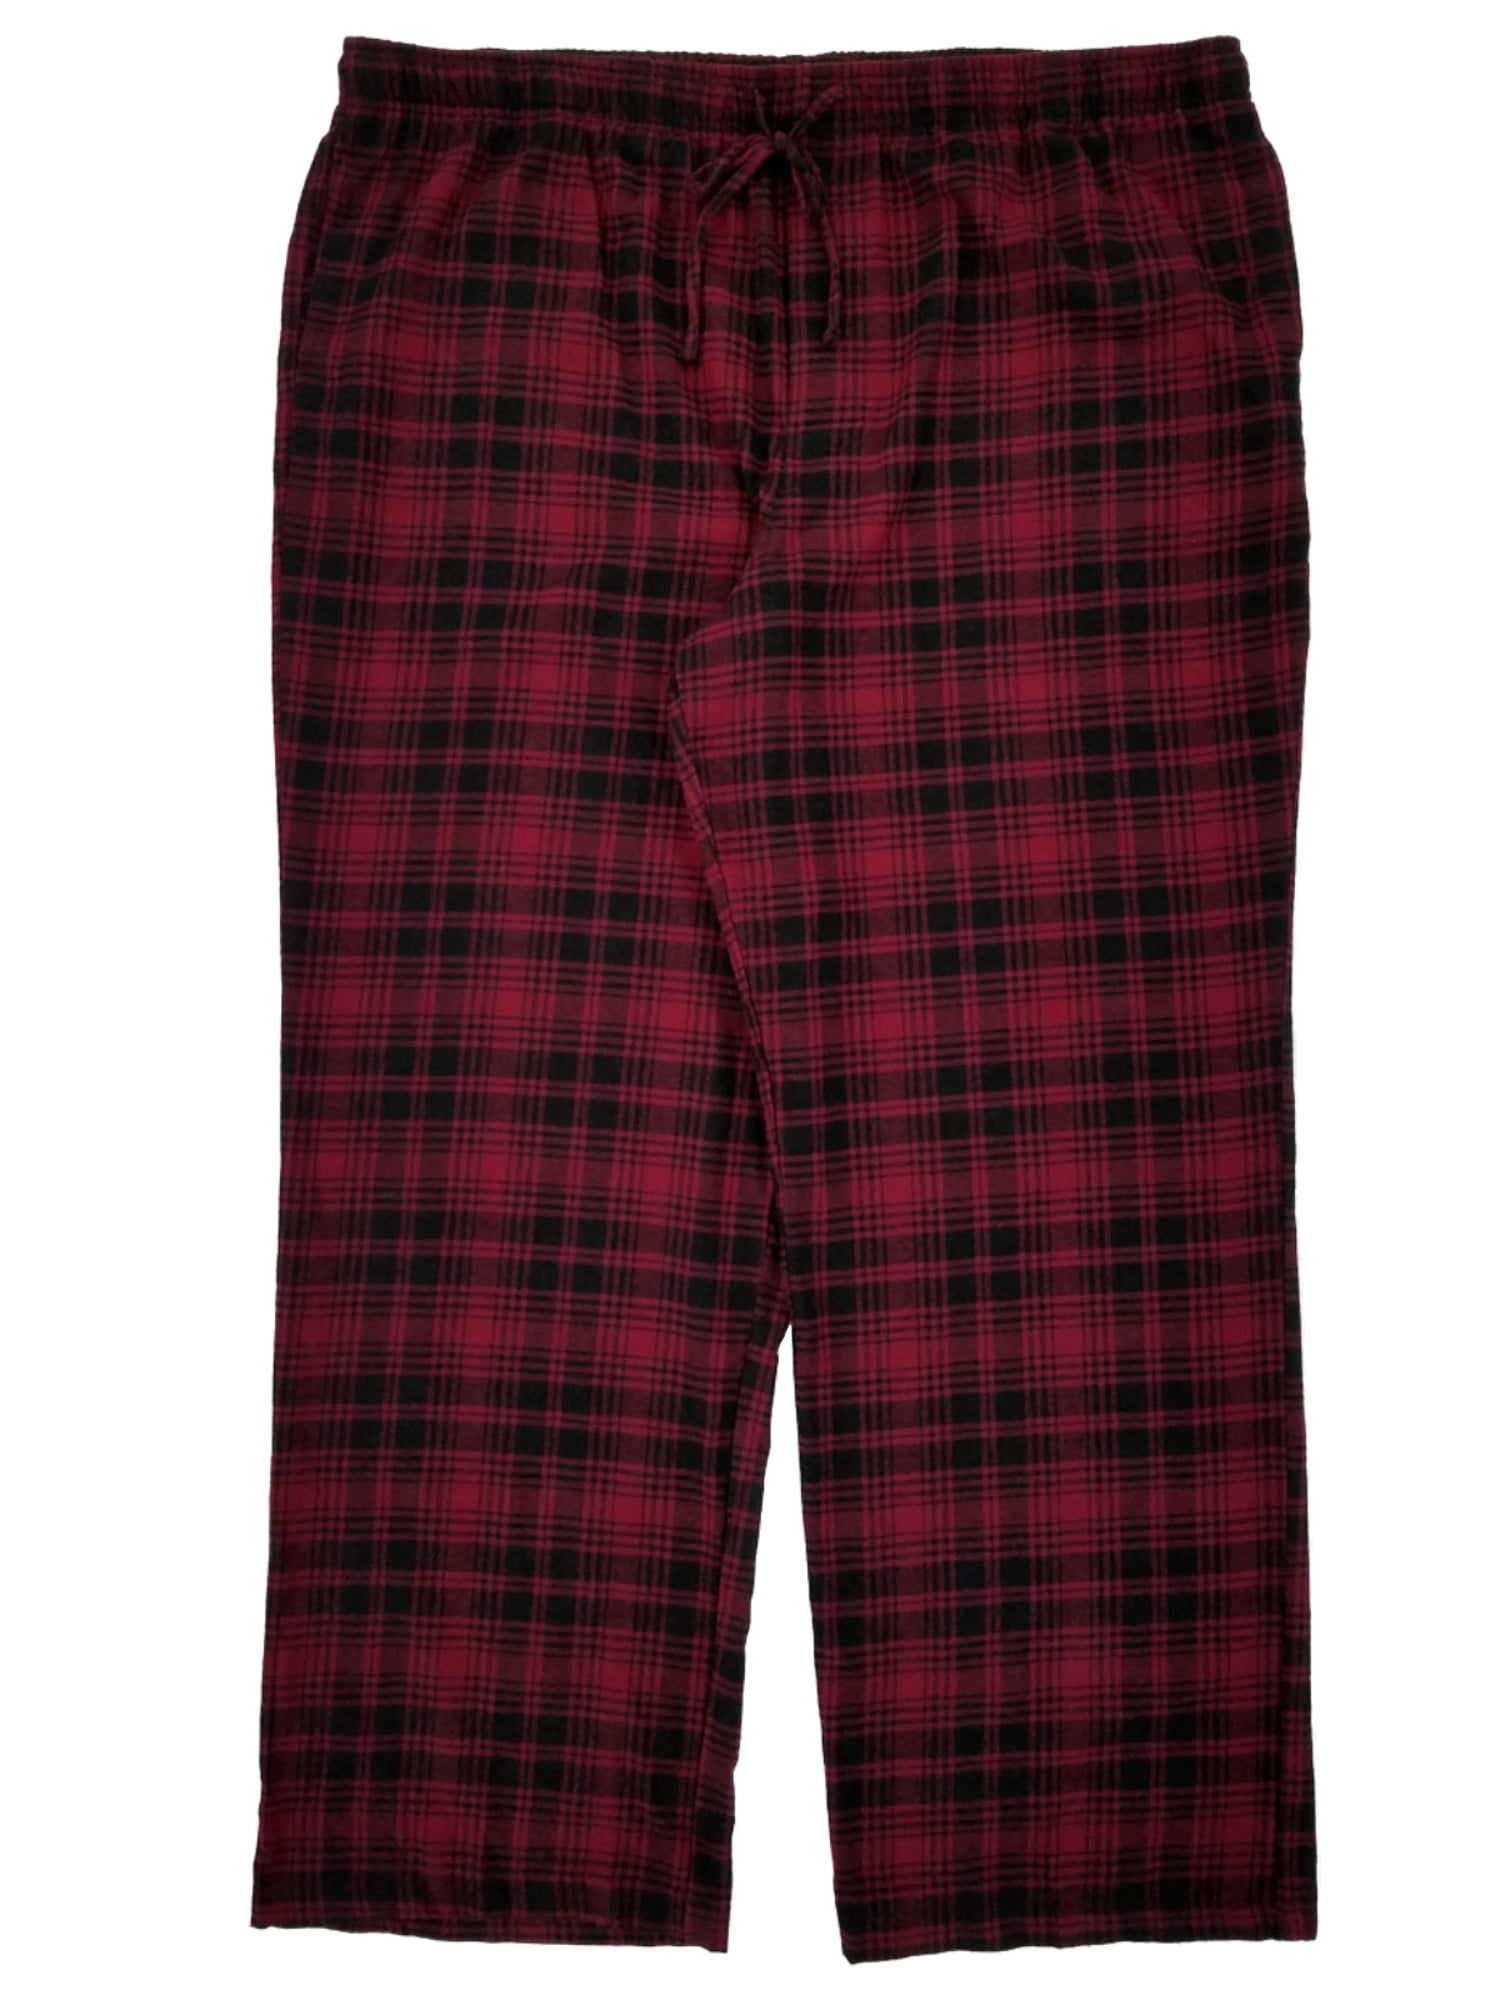 NORTHWEST TERRITOR XL LOUNGE LOUNGING PANTS MENS PAJAMAS BOTTOMS TREES FLANNEL